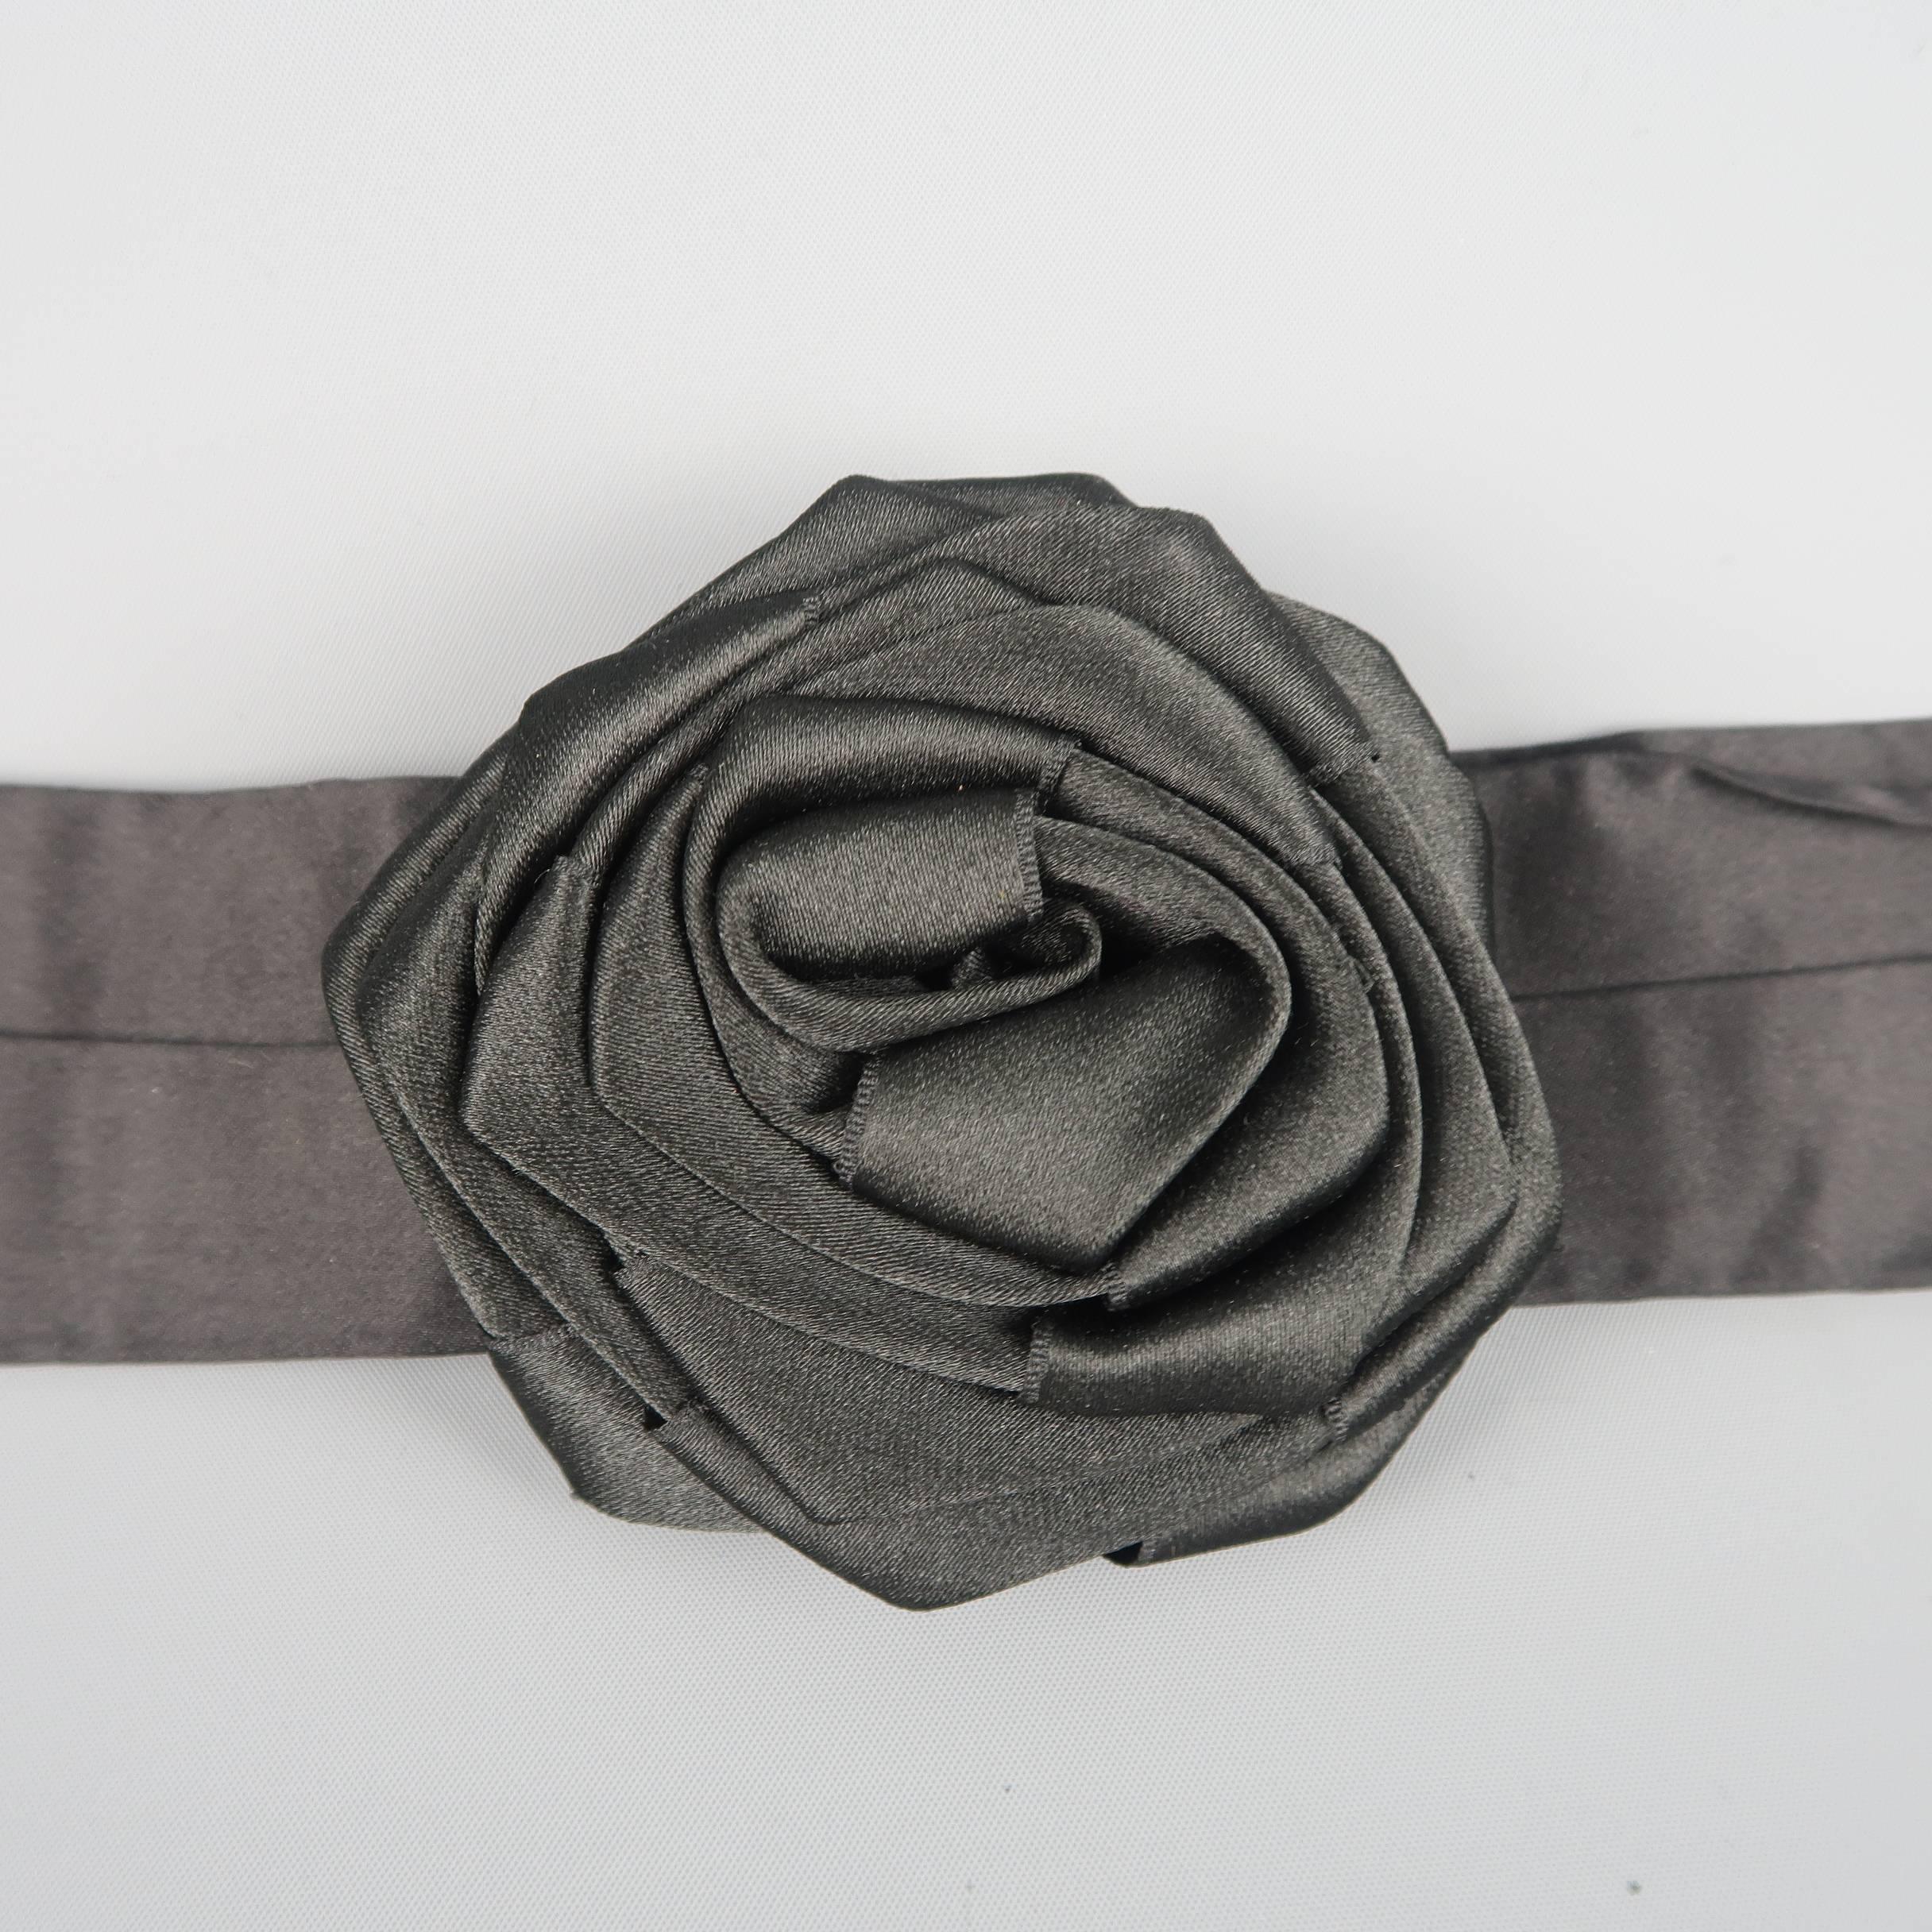 MARC JACOBS belt comes in black suede with knit trim and features a structured rose and adjustable snap closure.
 
Good Pre-Owned Condition.
 
Length: 40  in.
Width: 4.5 in.
Fits: 32 - 34  in.
SKU: 87212